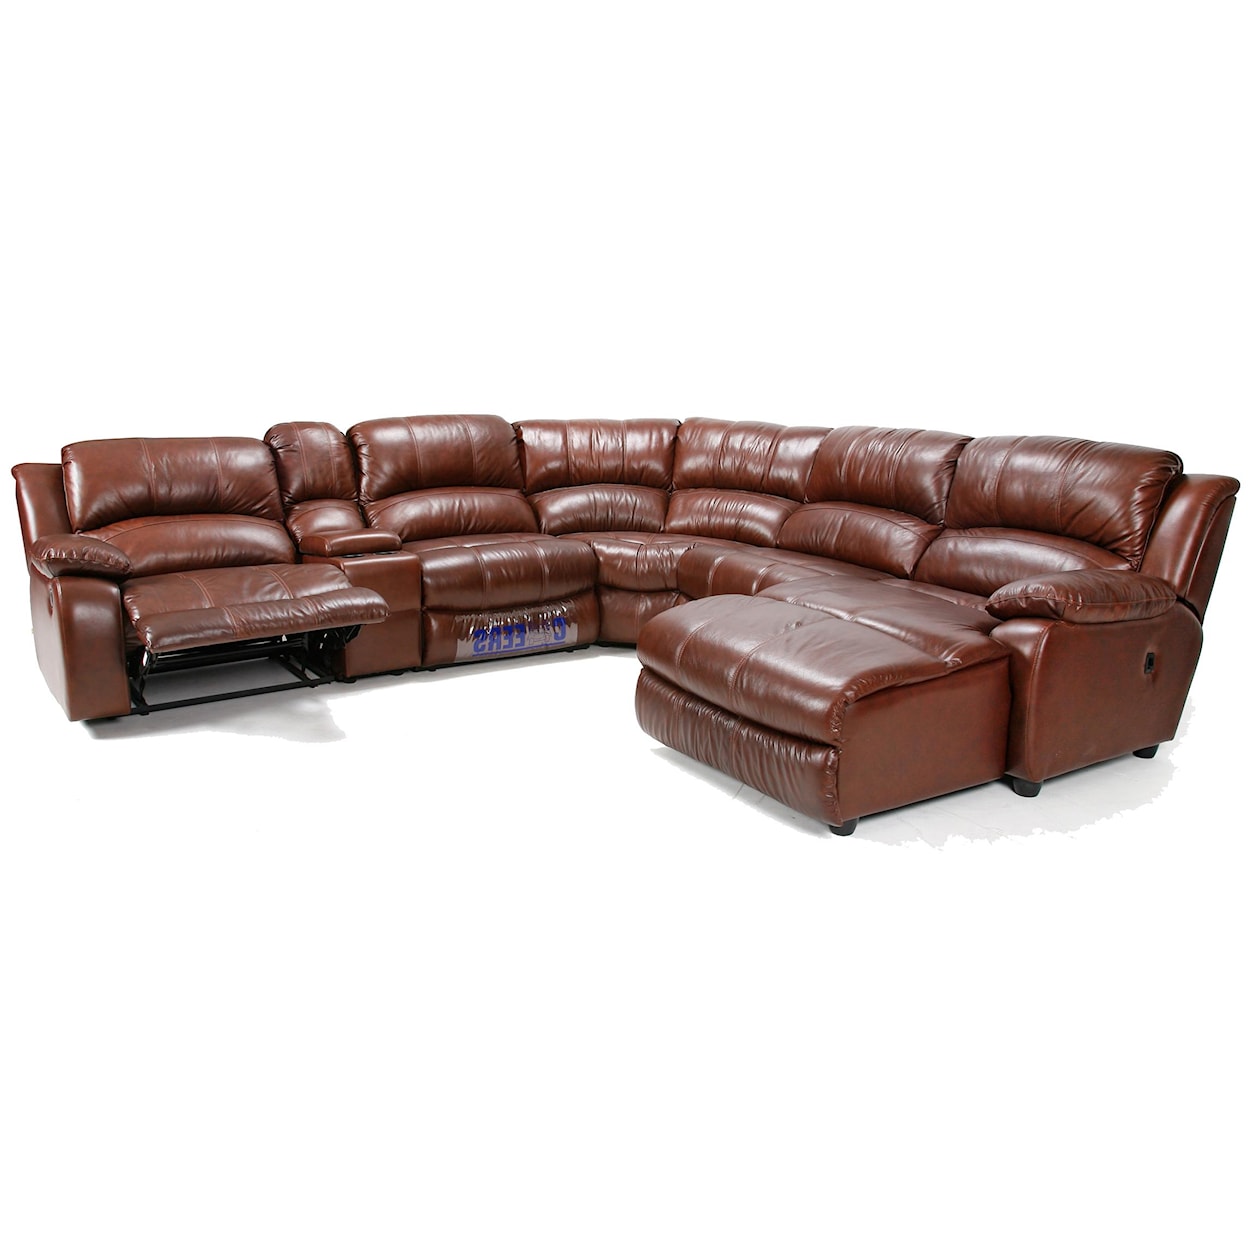 VFM Signature U8582 Reclining Sectional Sofa With Chaise